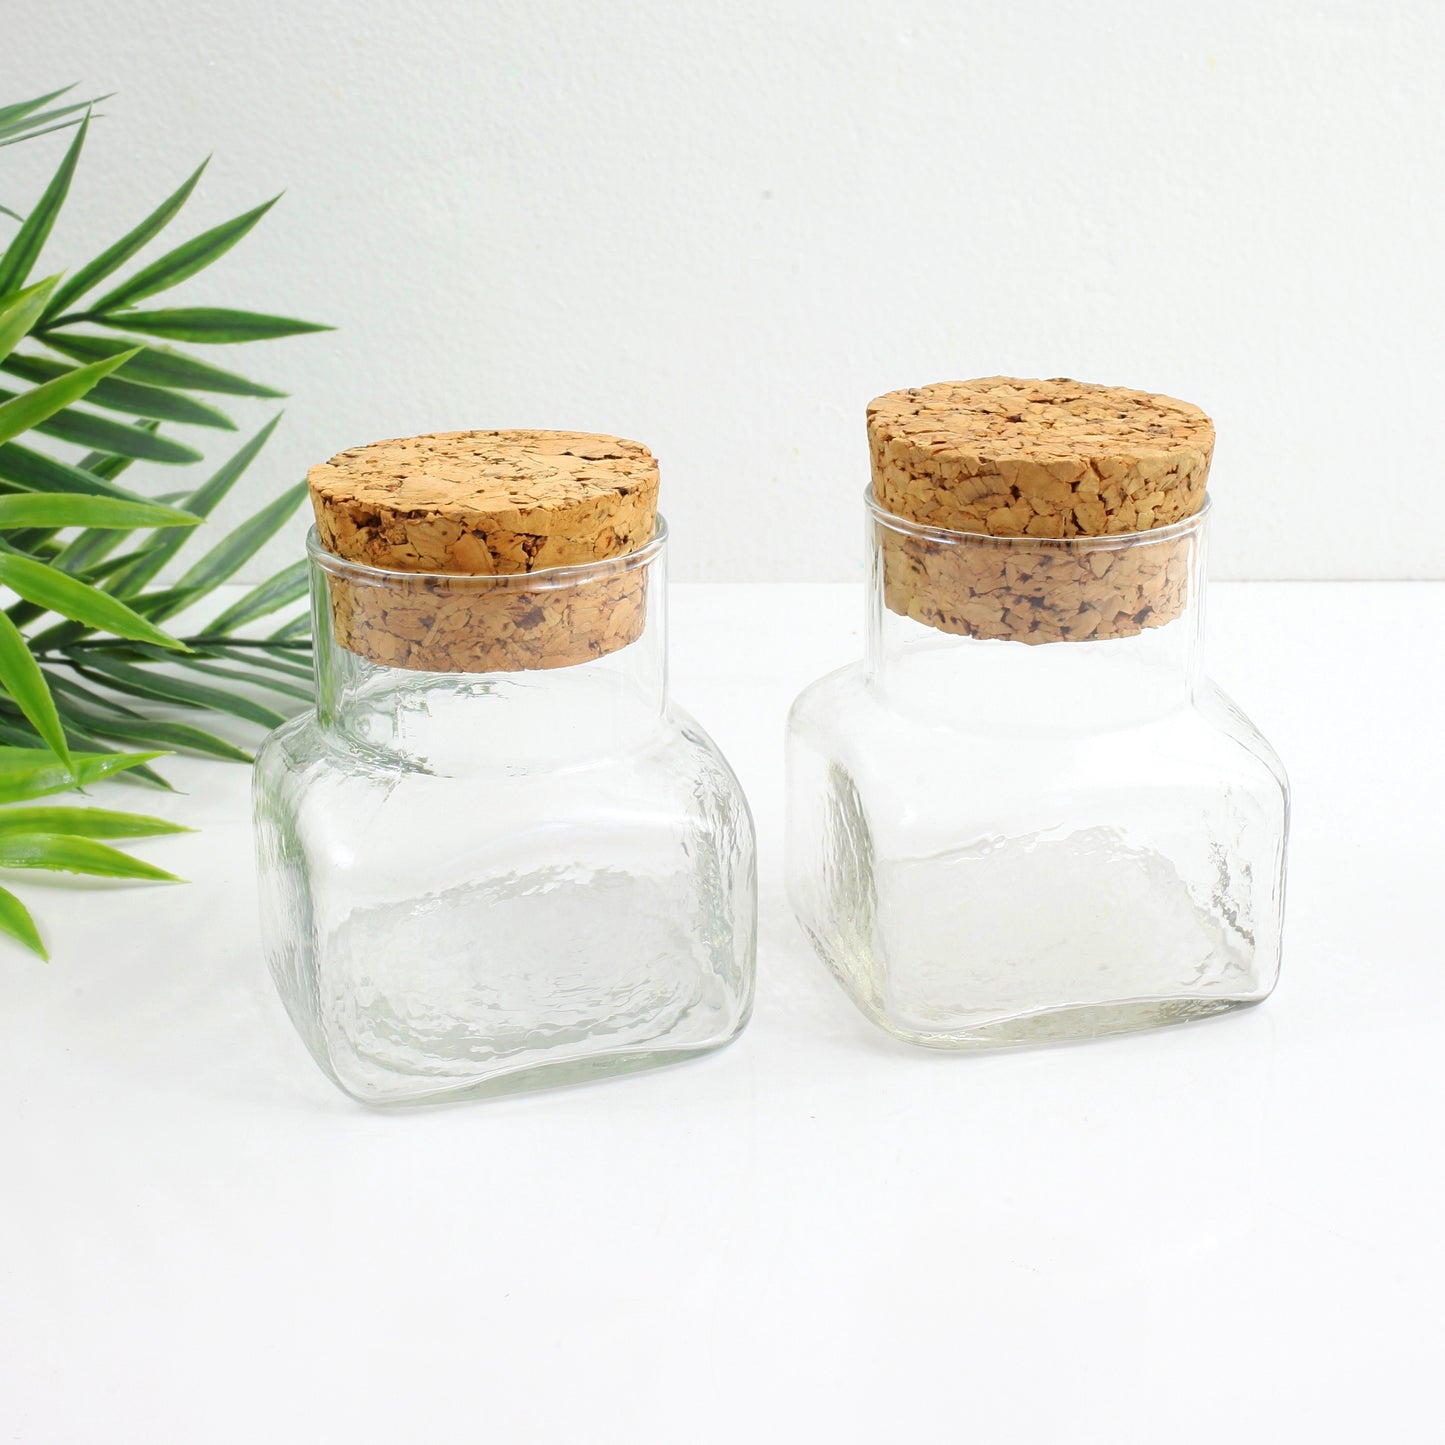 SOLD - Vintage Square Glass Apothecary Jars with Cork Lids